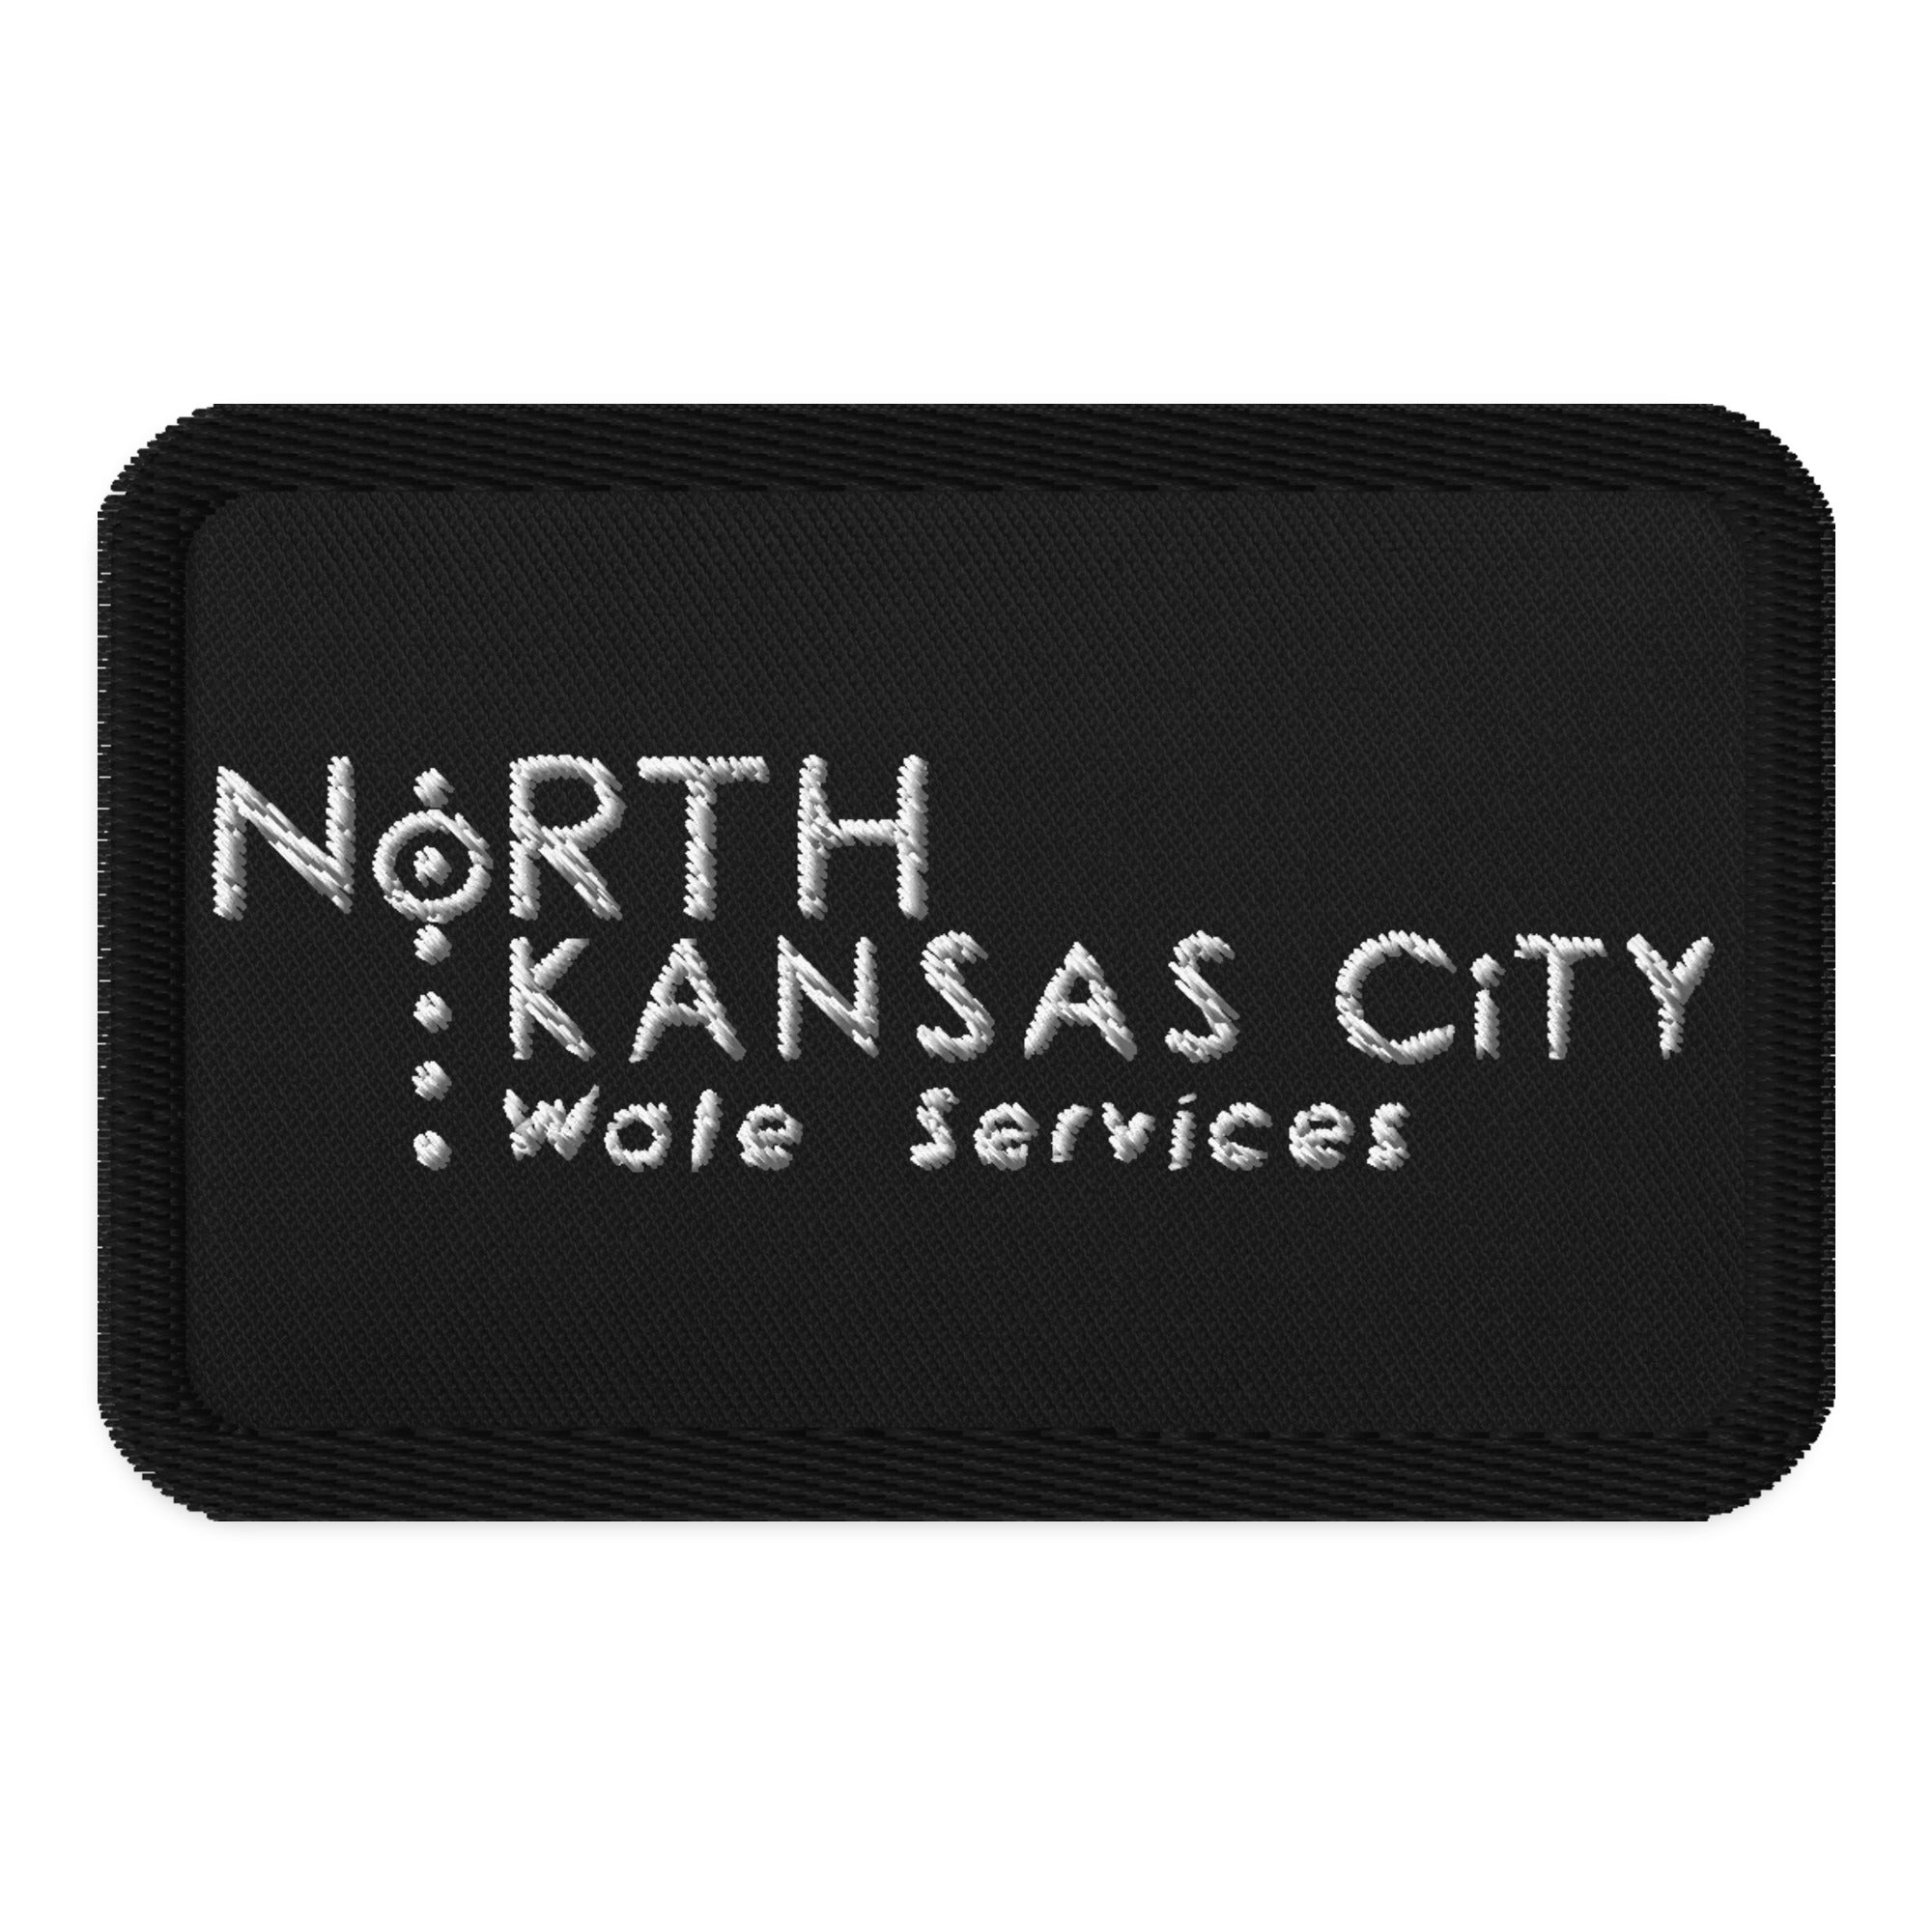 North Kansas City Water Services, Embroidered Patches